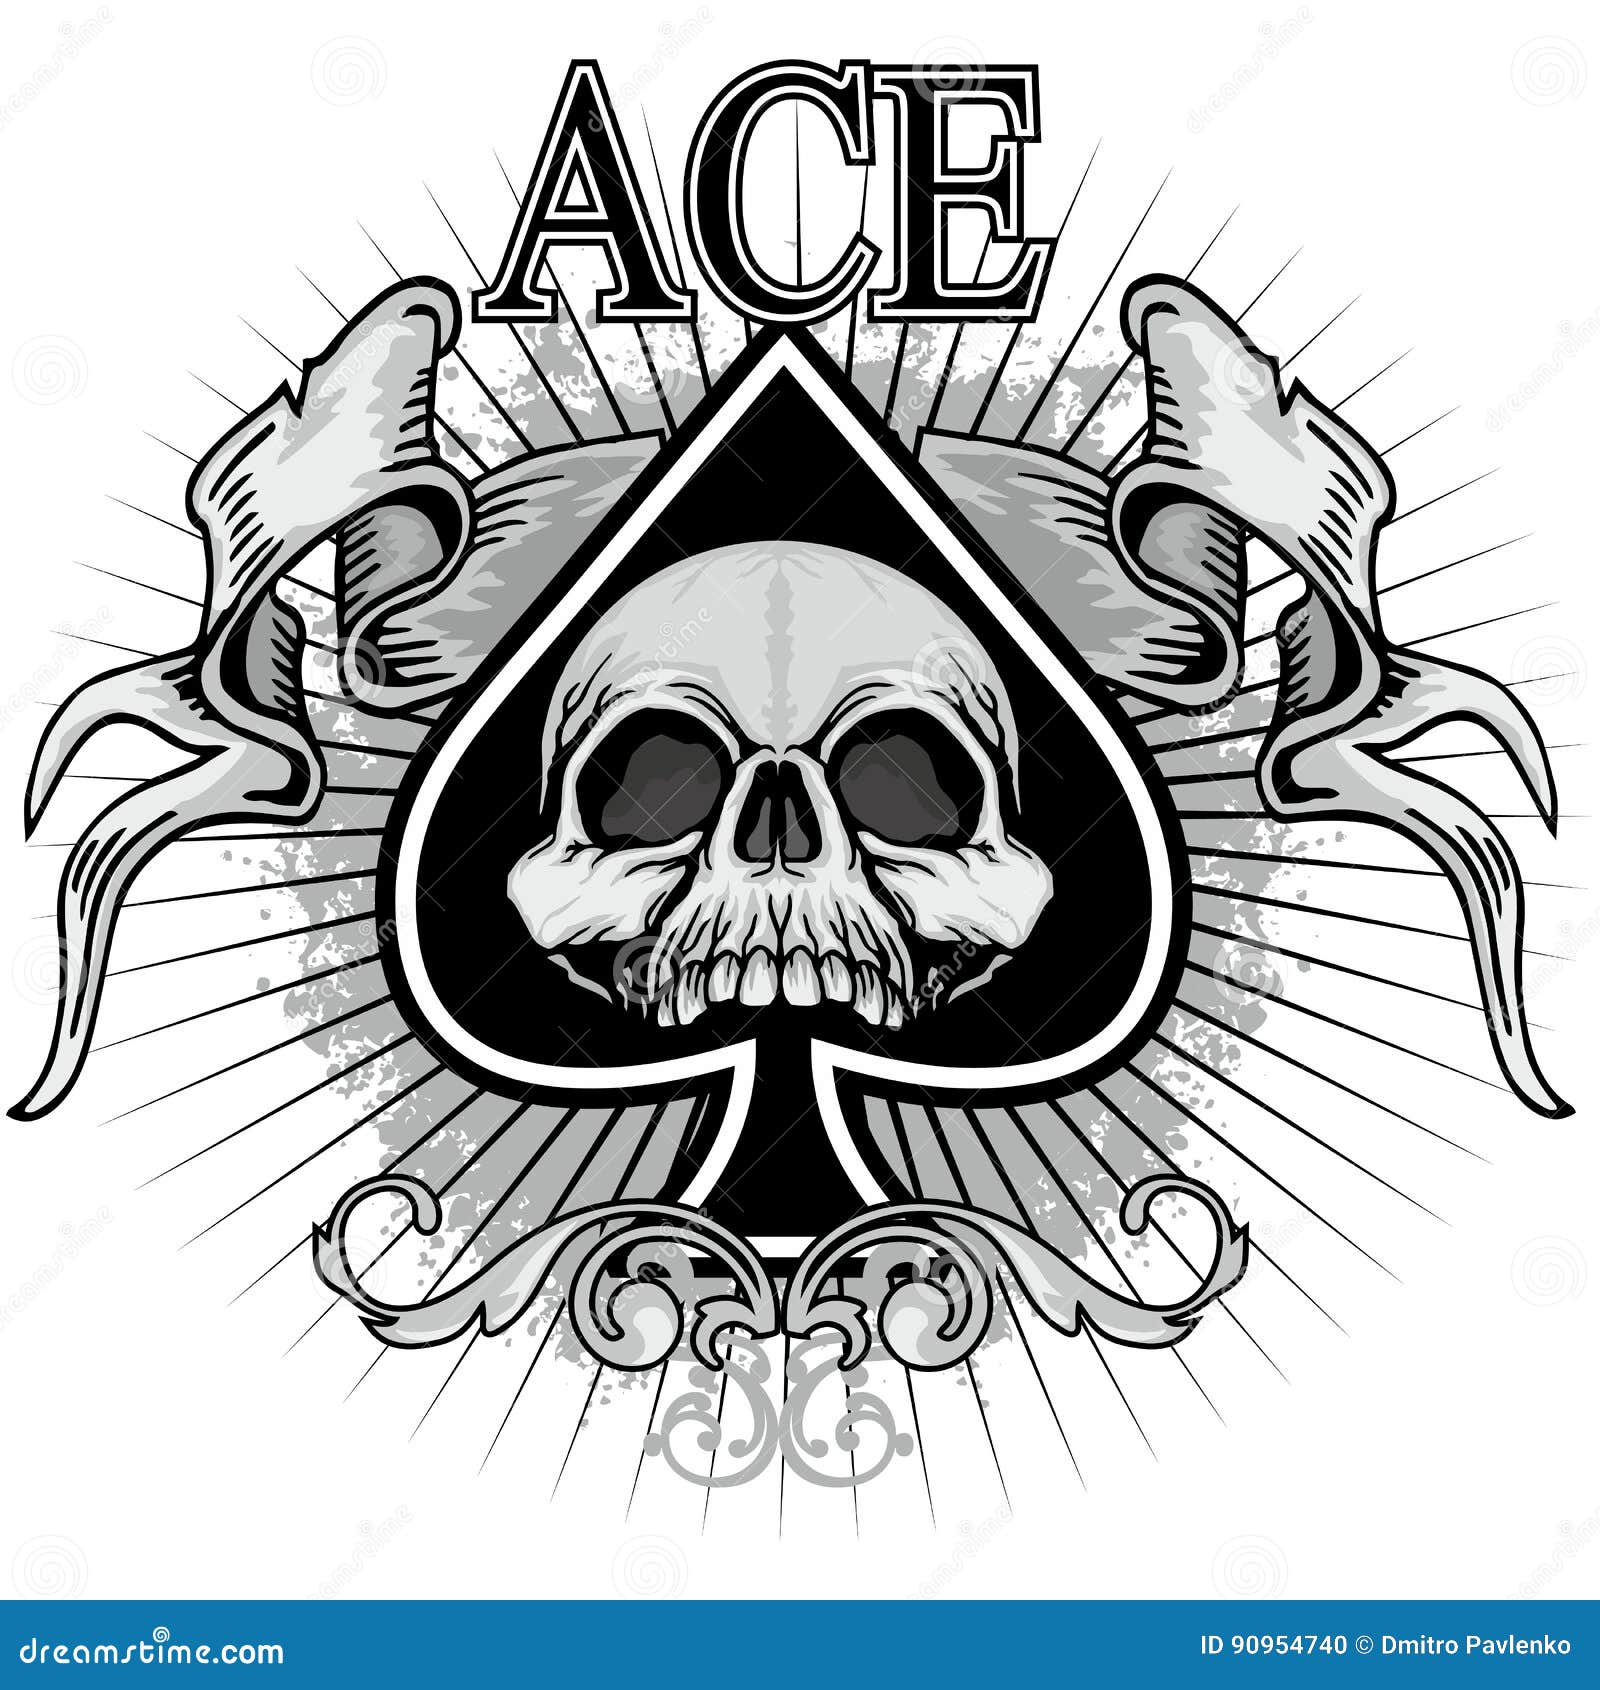 Ace of spades with skull stock illustration. Illustration of angel ...